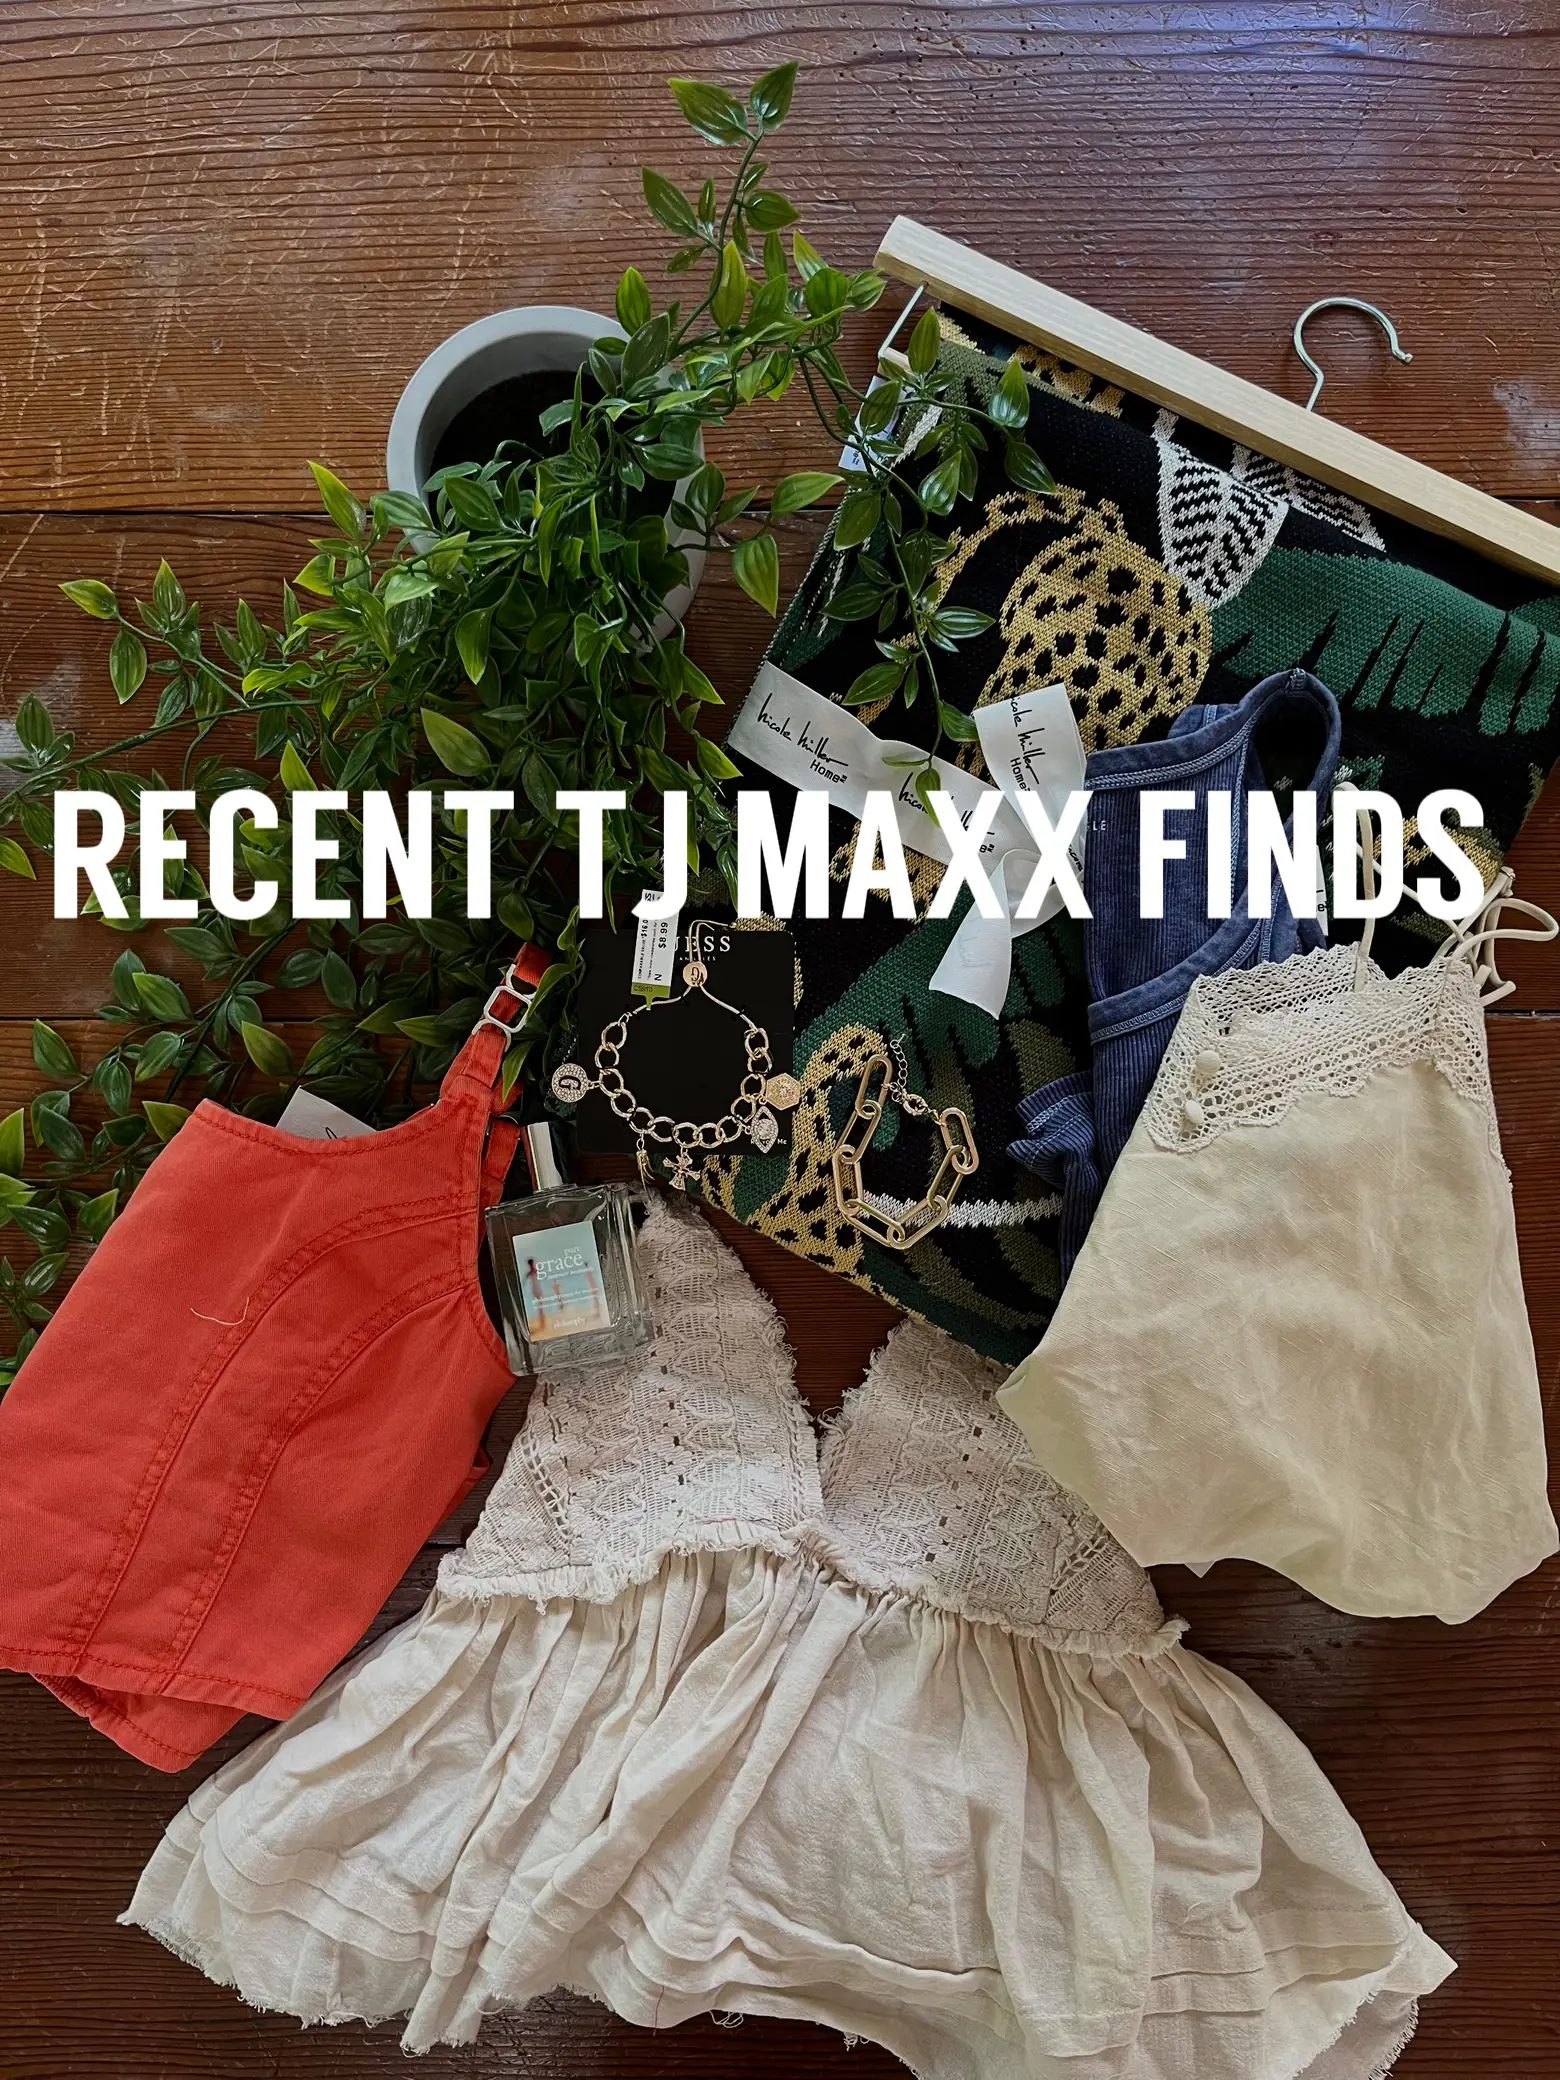 Off the Rack: Summer Clearance Highlights at T.J.Maxx - The Budget Babe